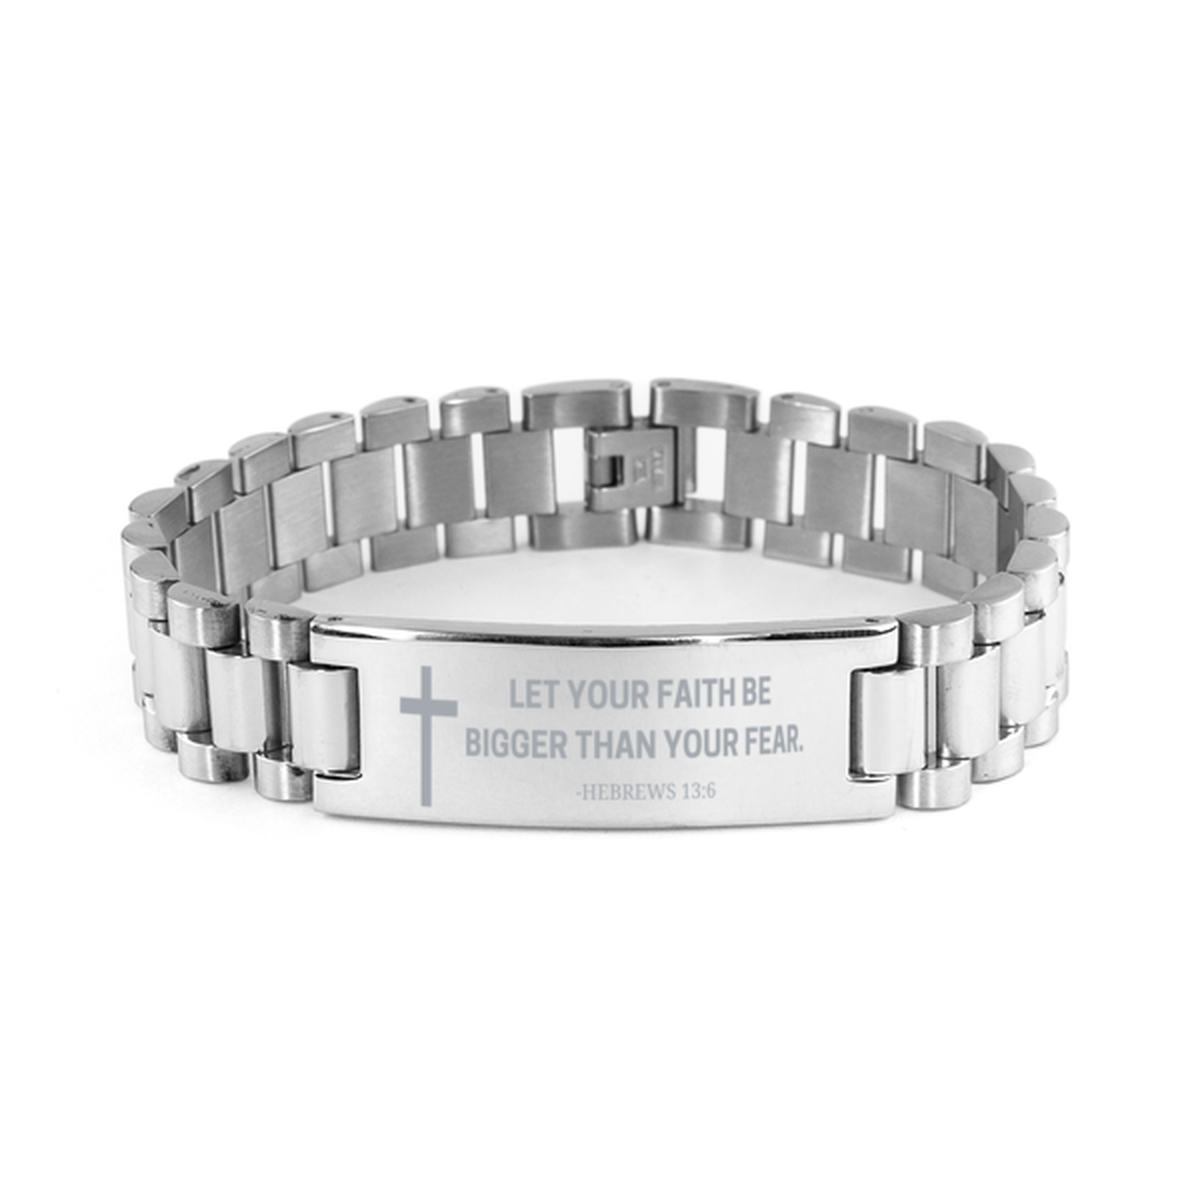 Baptism Gifts For Teenage Boys Girls, Christian Bible Verse Ladder Stainless Steel Bracelet, Let your faith be bigger than your fear, Catholic Confirmation Gifts for Son, Godson, Grandson, Nephew